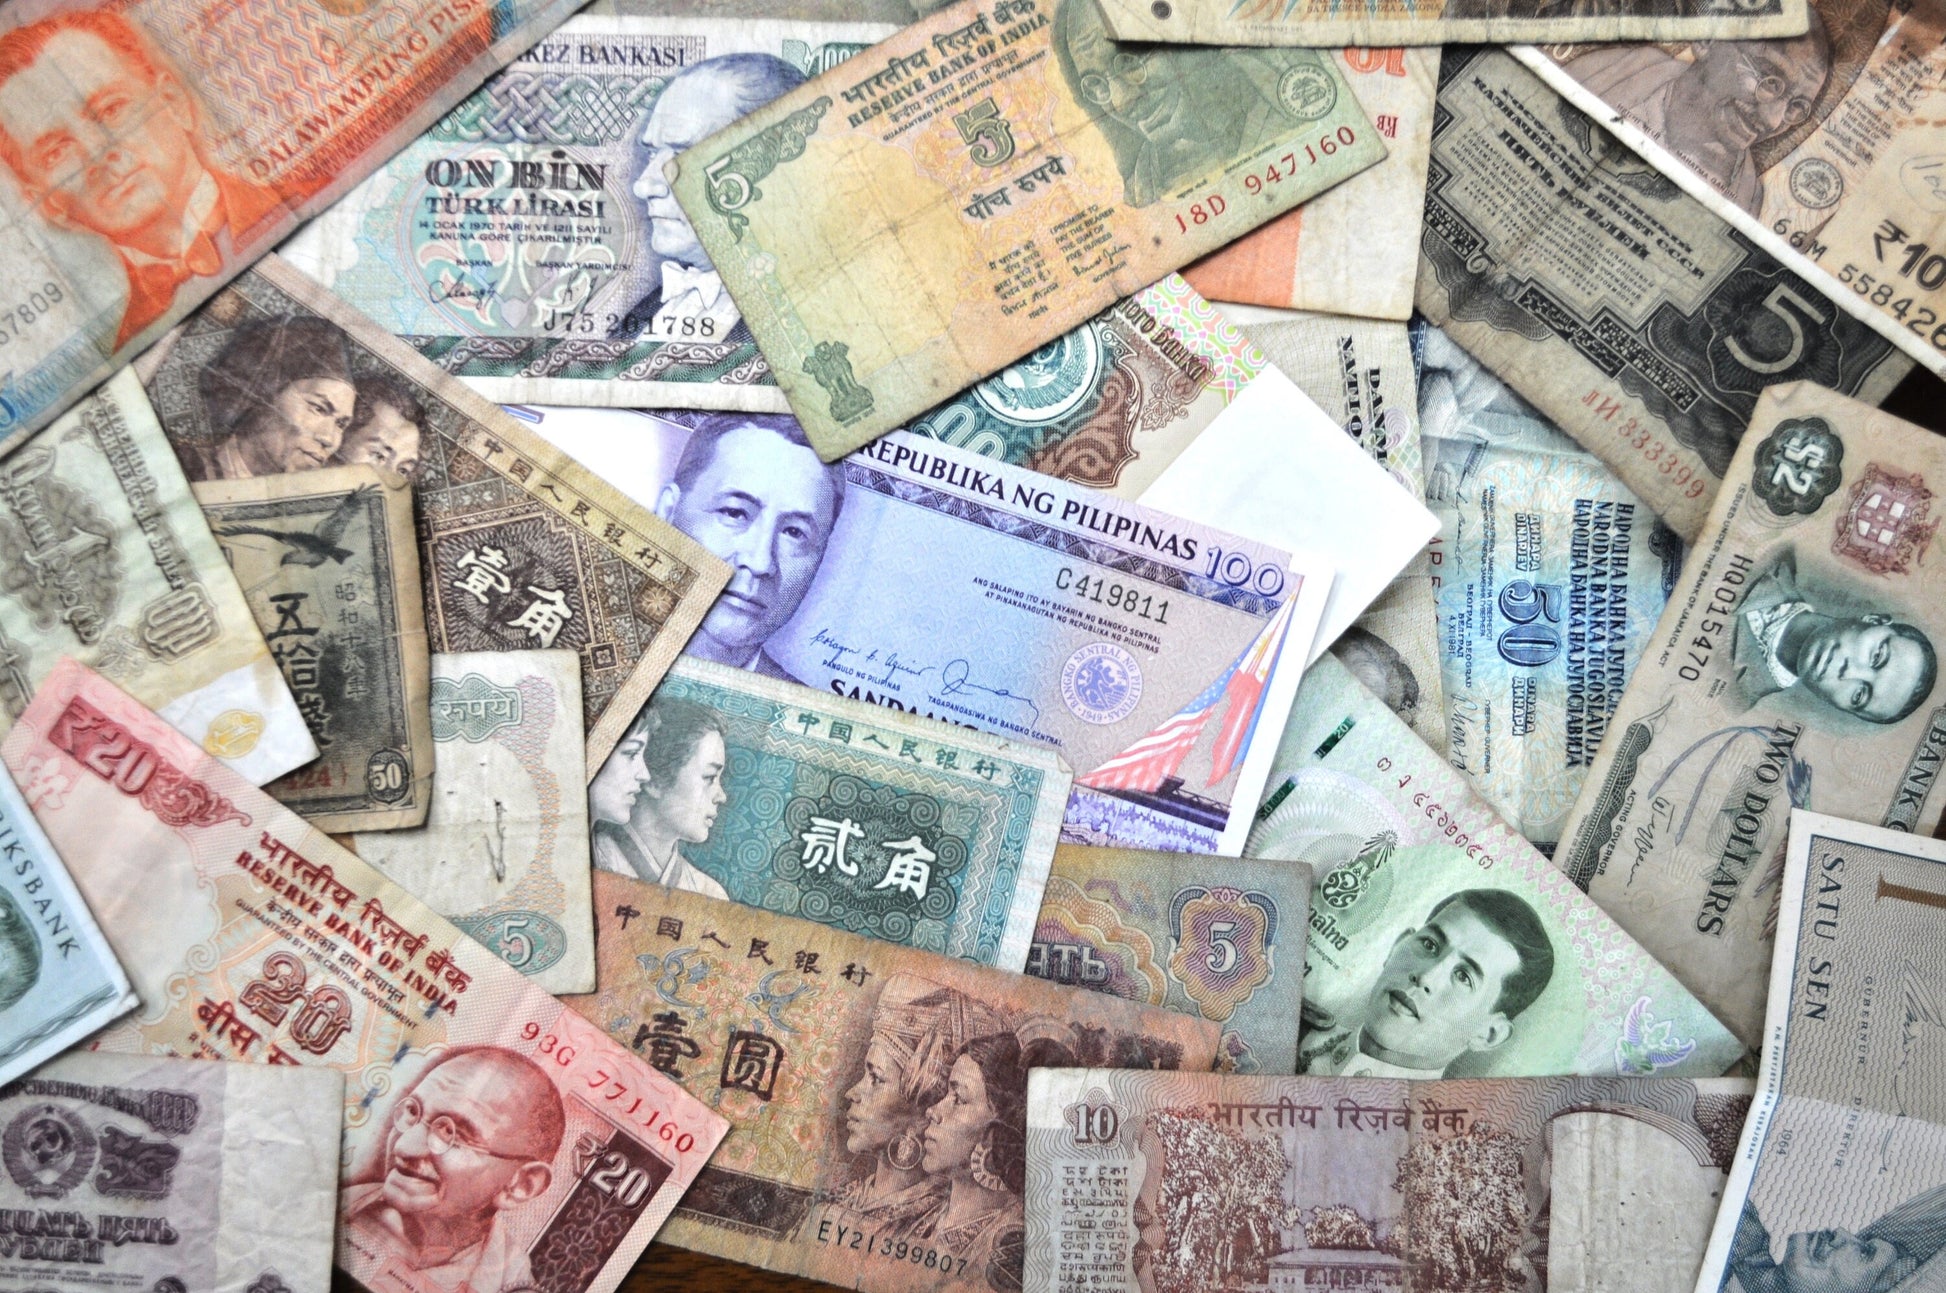 World Paper Money / Banknotes from Around the World - Mixed Dates, Denominations, and Countries - Lots to choose from!!! Paper Currency